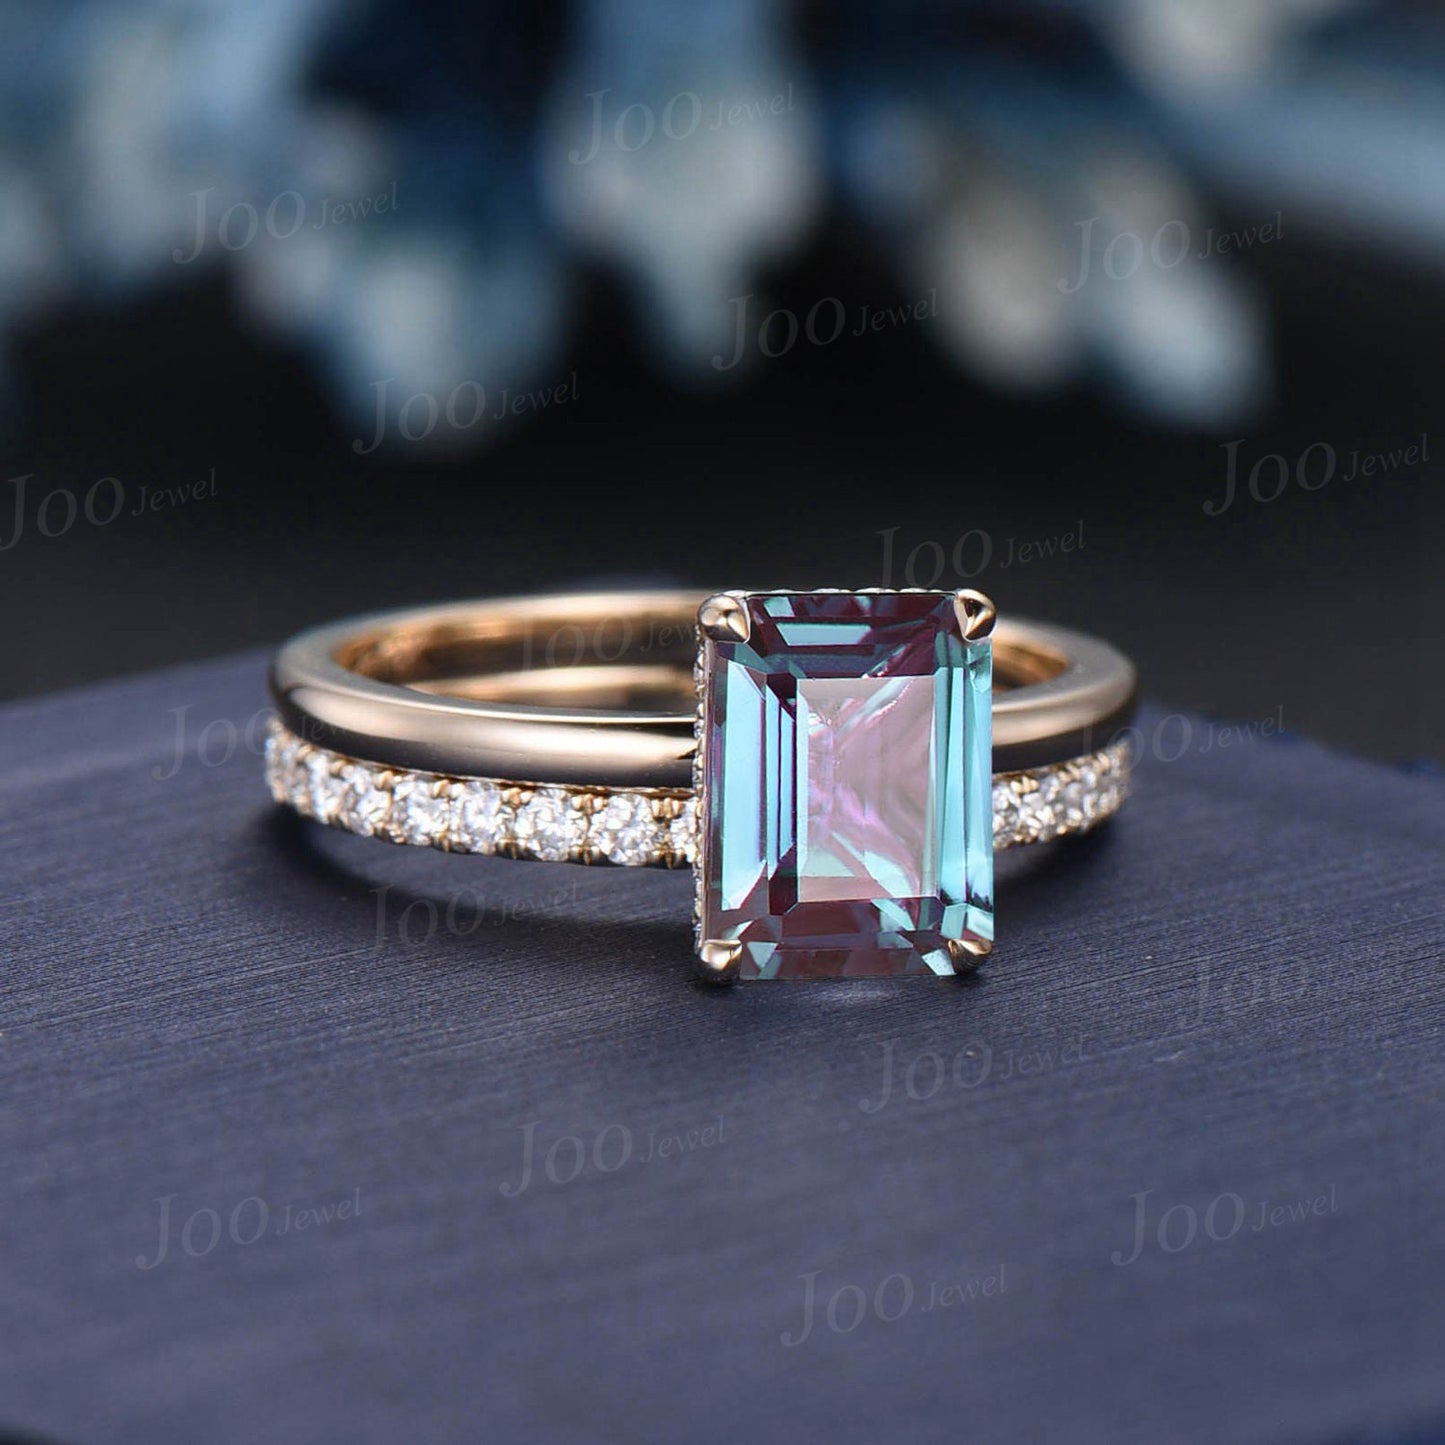 2ct Emerald Cut Color-Change Alexandrite Engagement Ring 14K Yellow Gold Solitaire Alexandrite Wedding Ring Set Hidden Halo Moissanite Ring